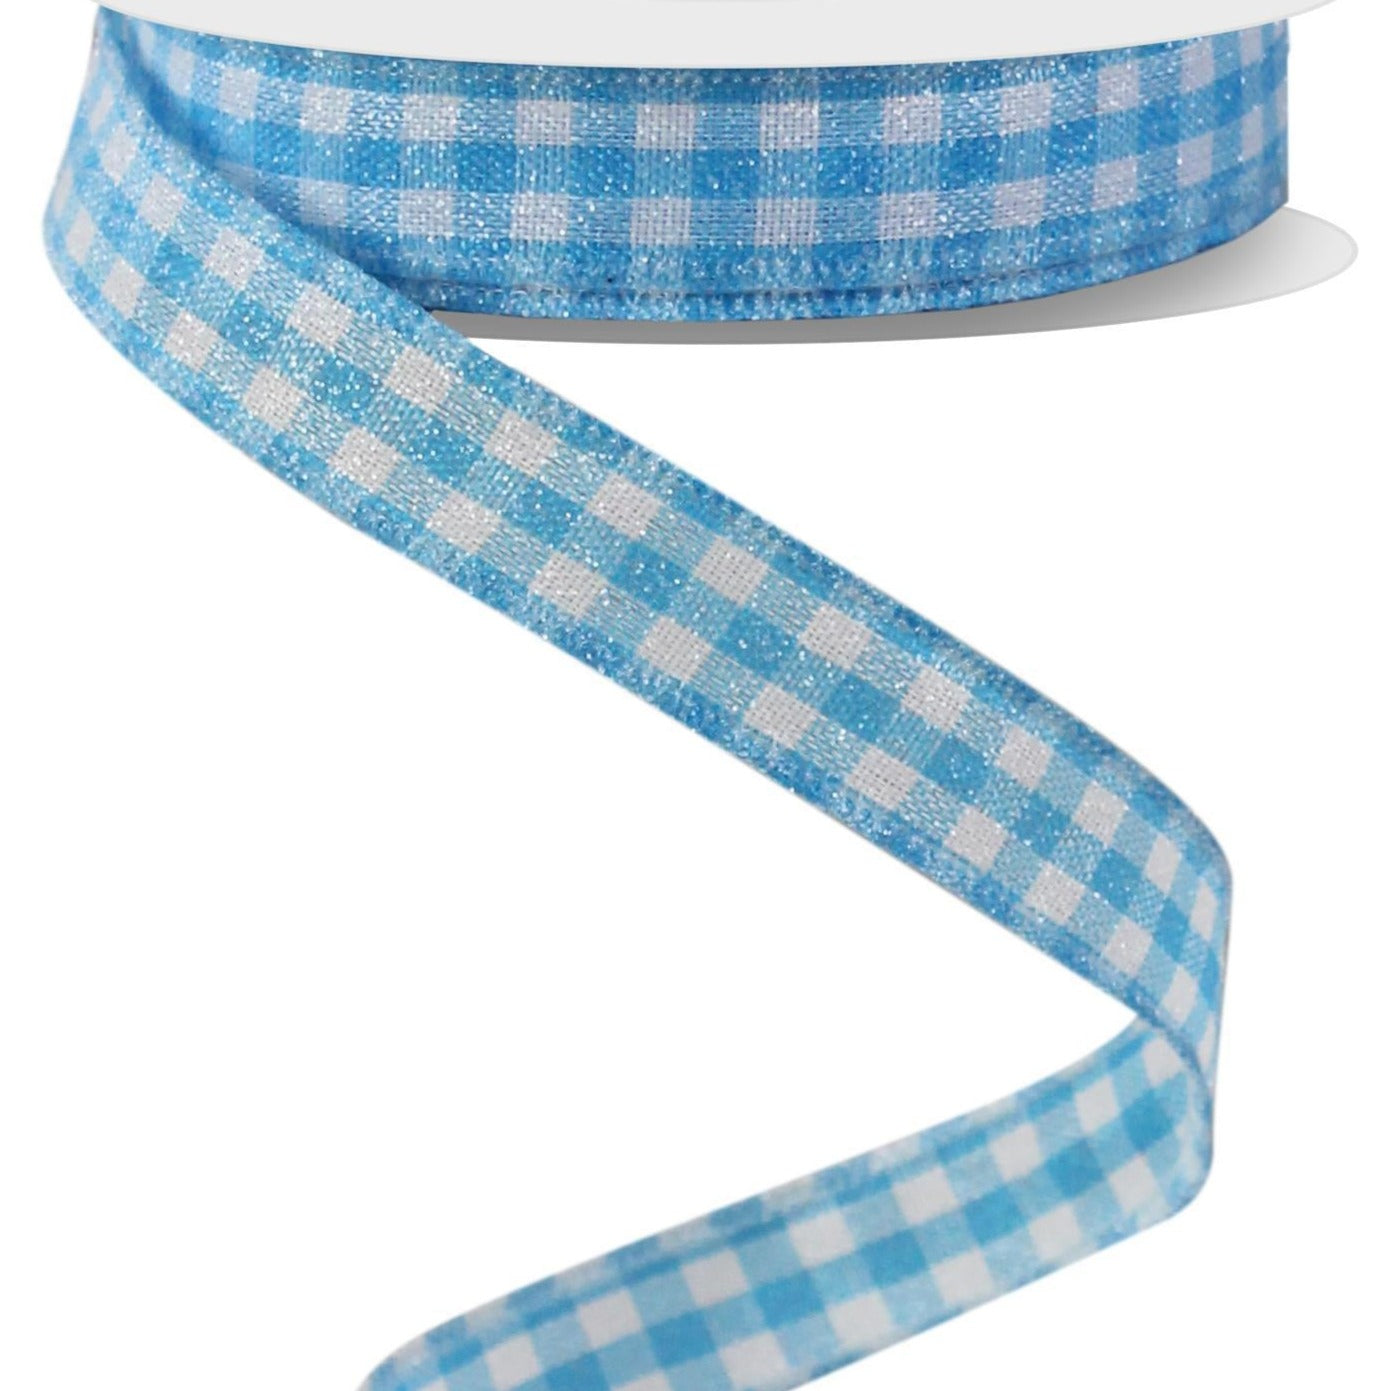 Wired Ribbon * Glitter Gingham Check * Blue and White Canvas * 5/8" x 10 Yards * RGE126603